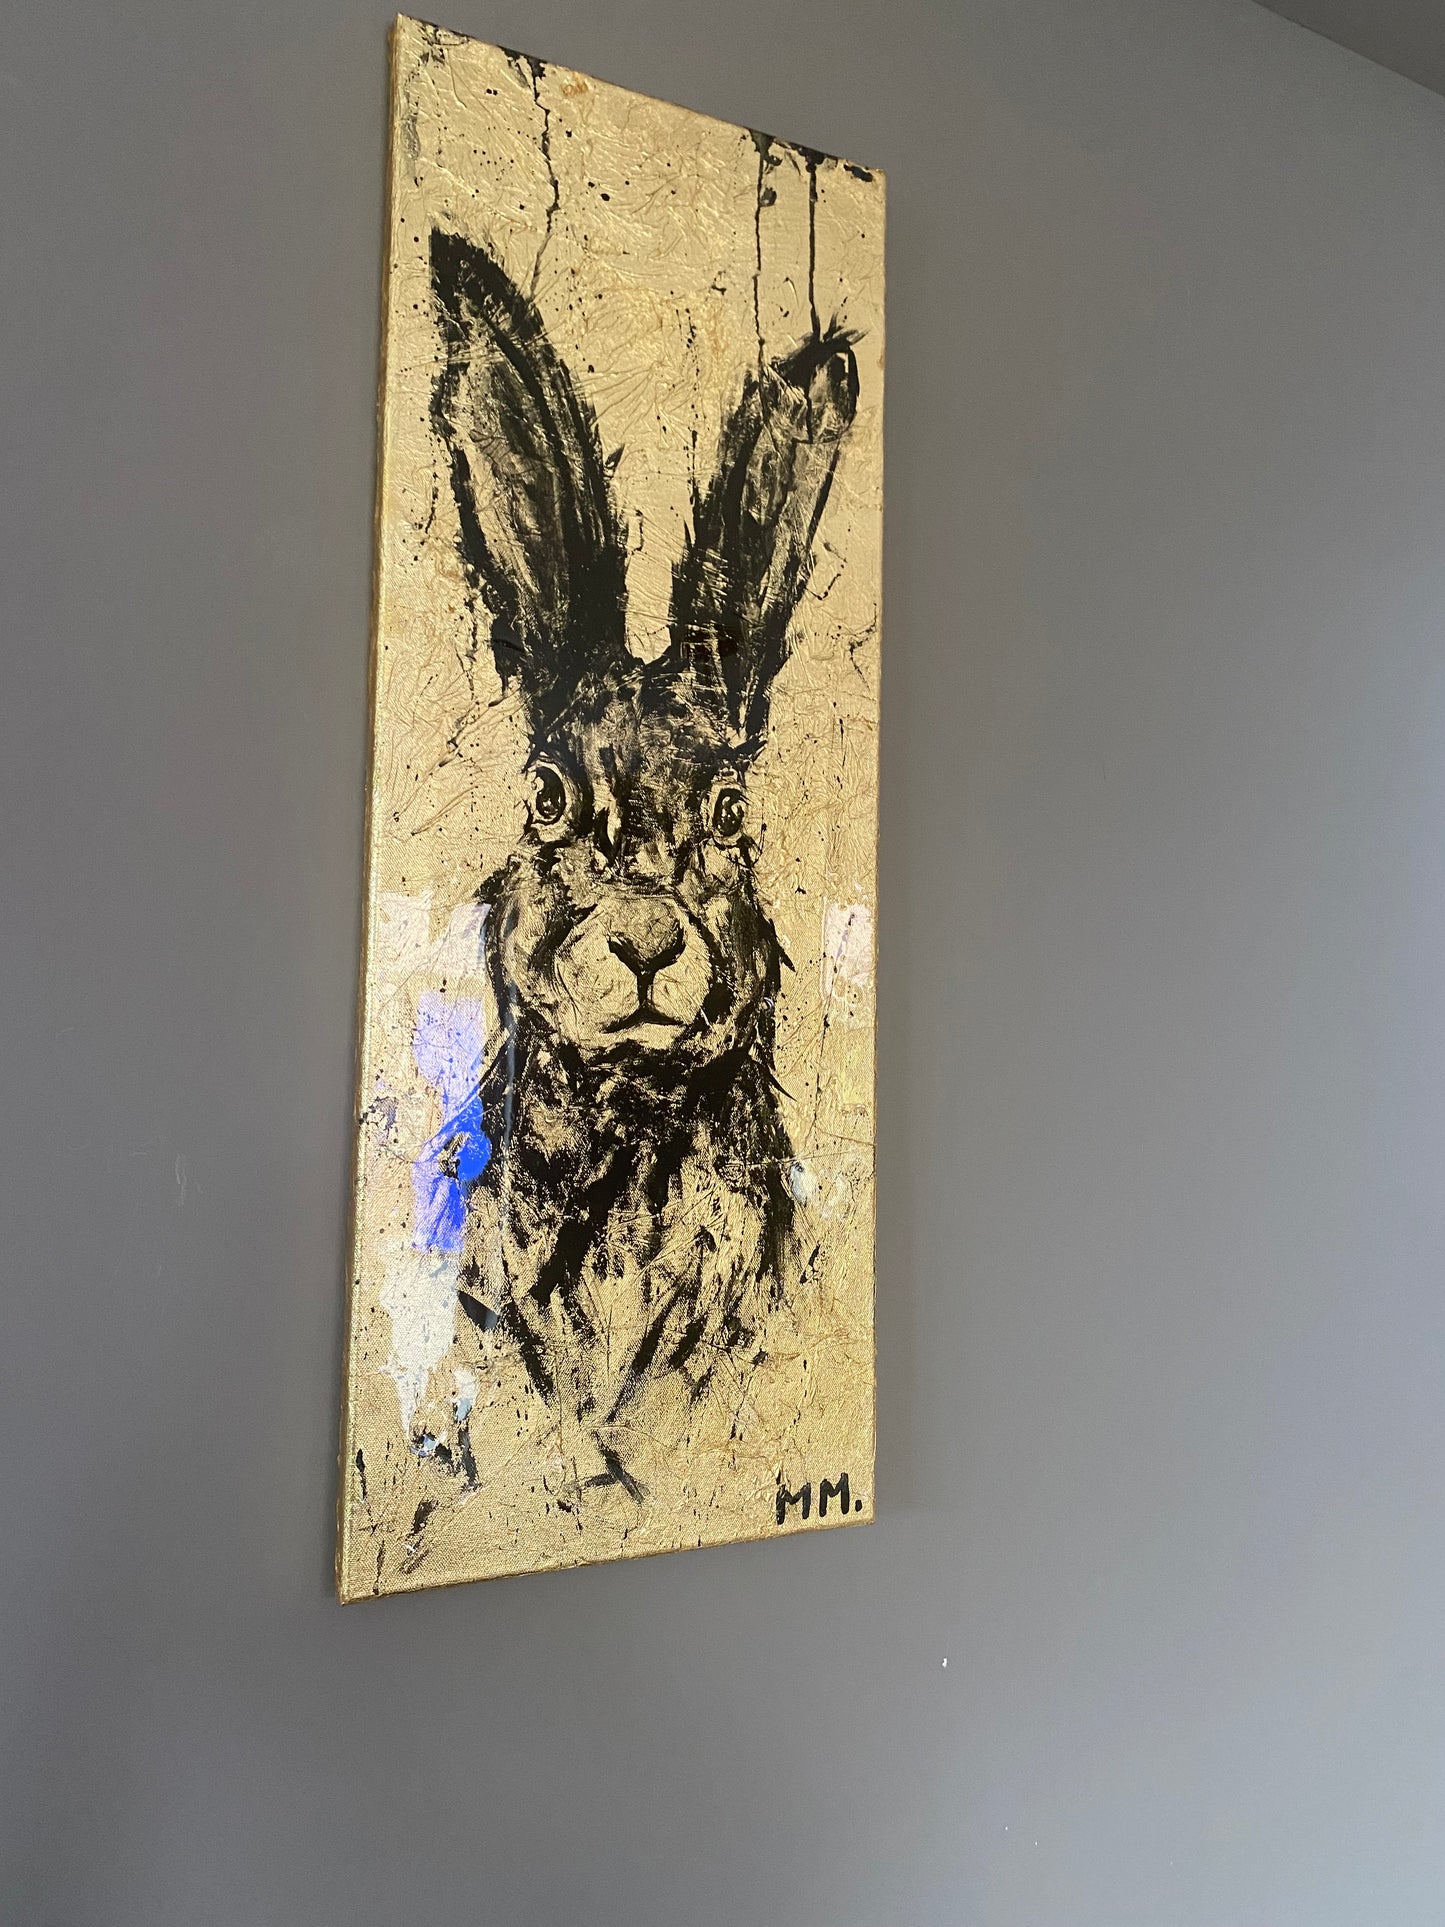 Large Hare Rabbit Painting Original Artwork Gold Leaf Resin On Canvas Wall Decor